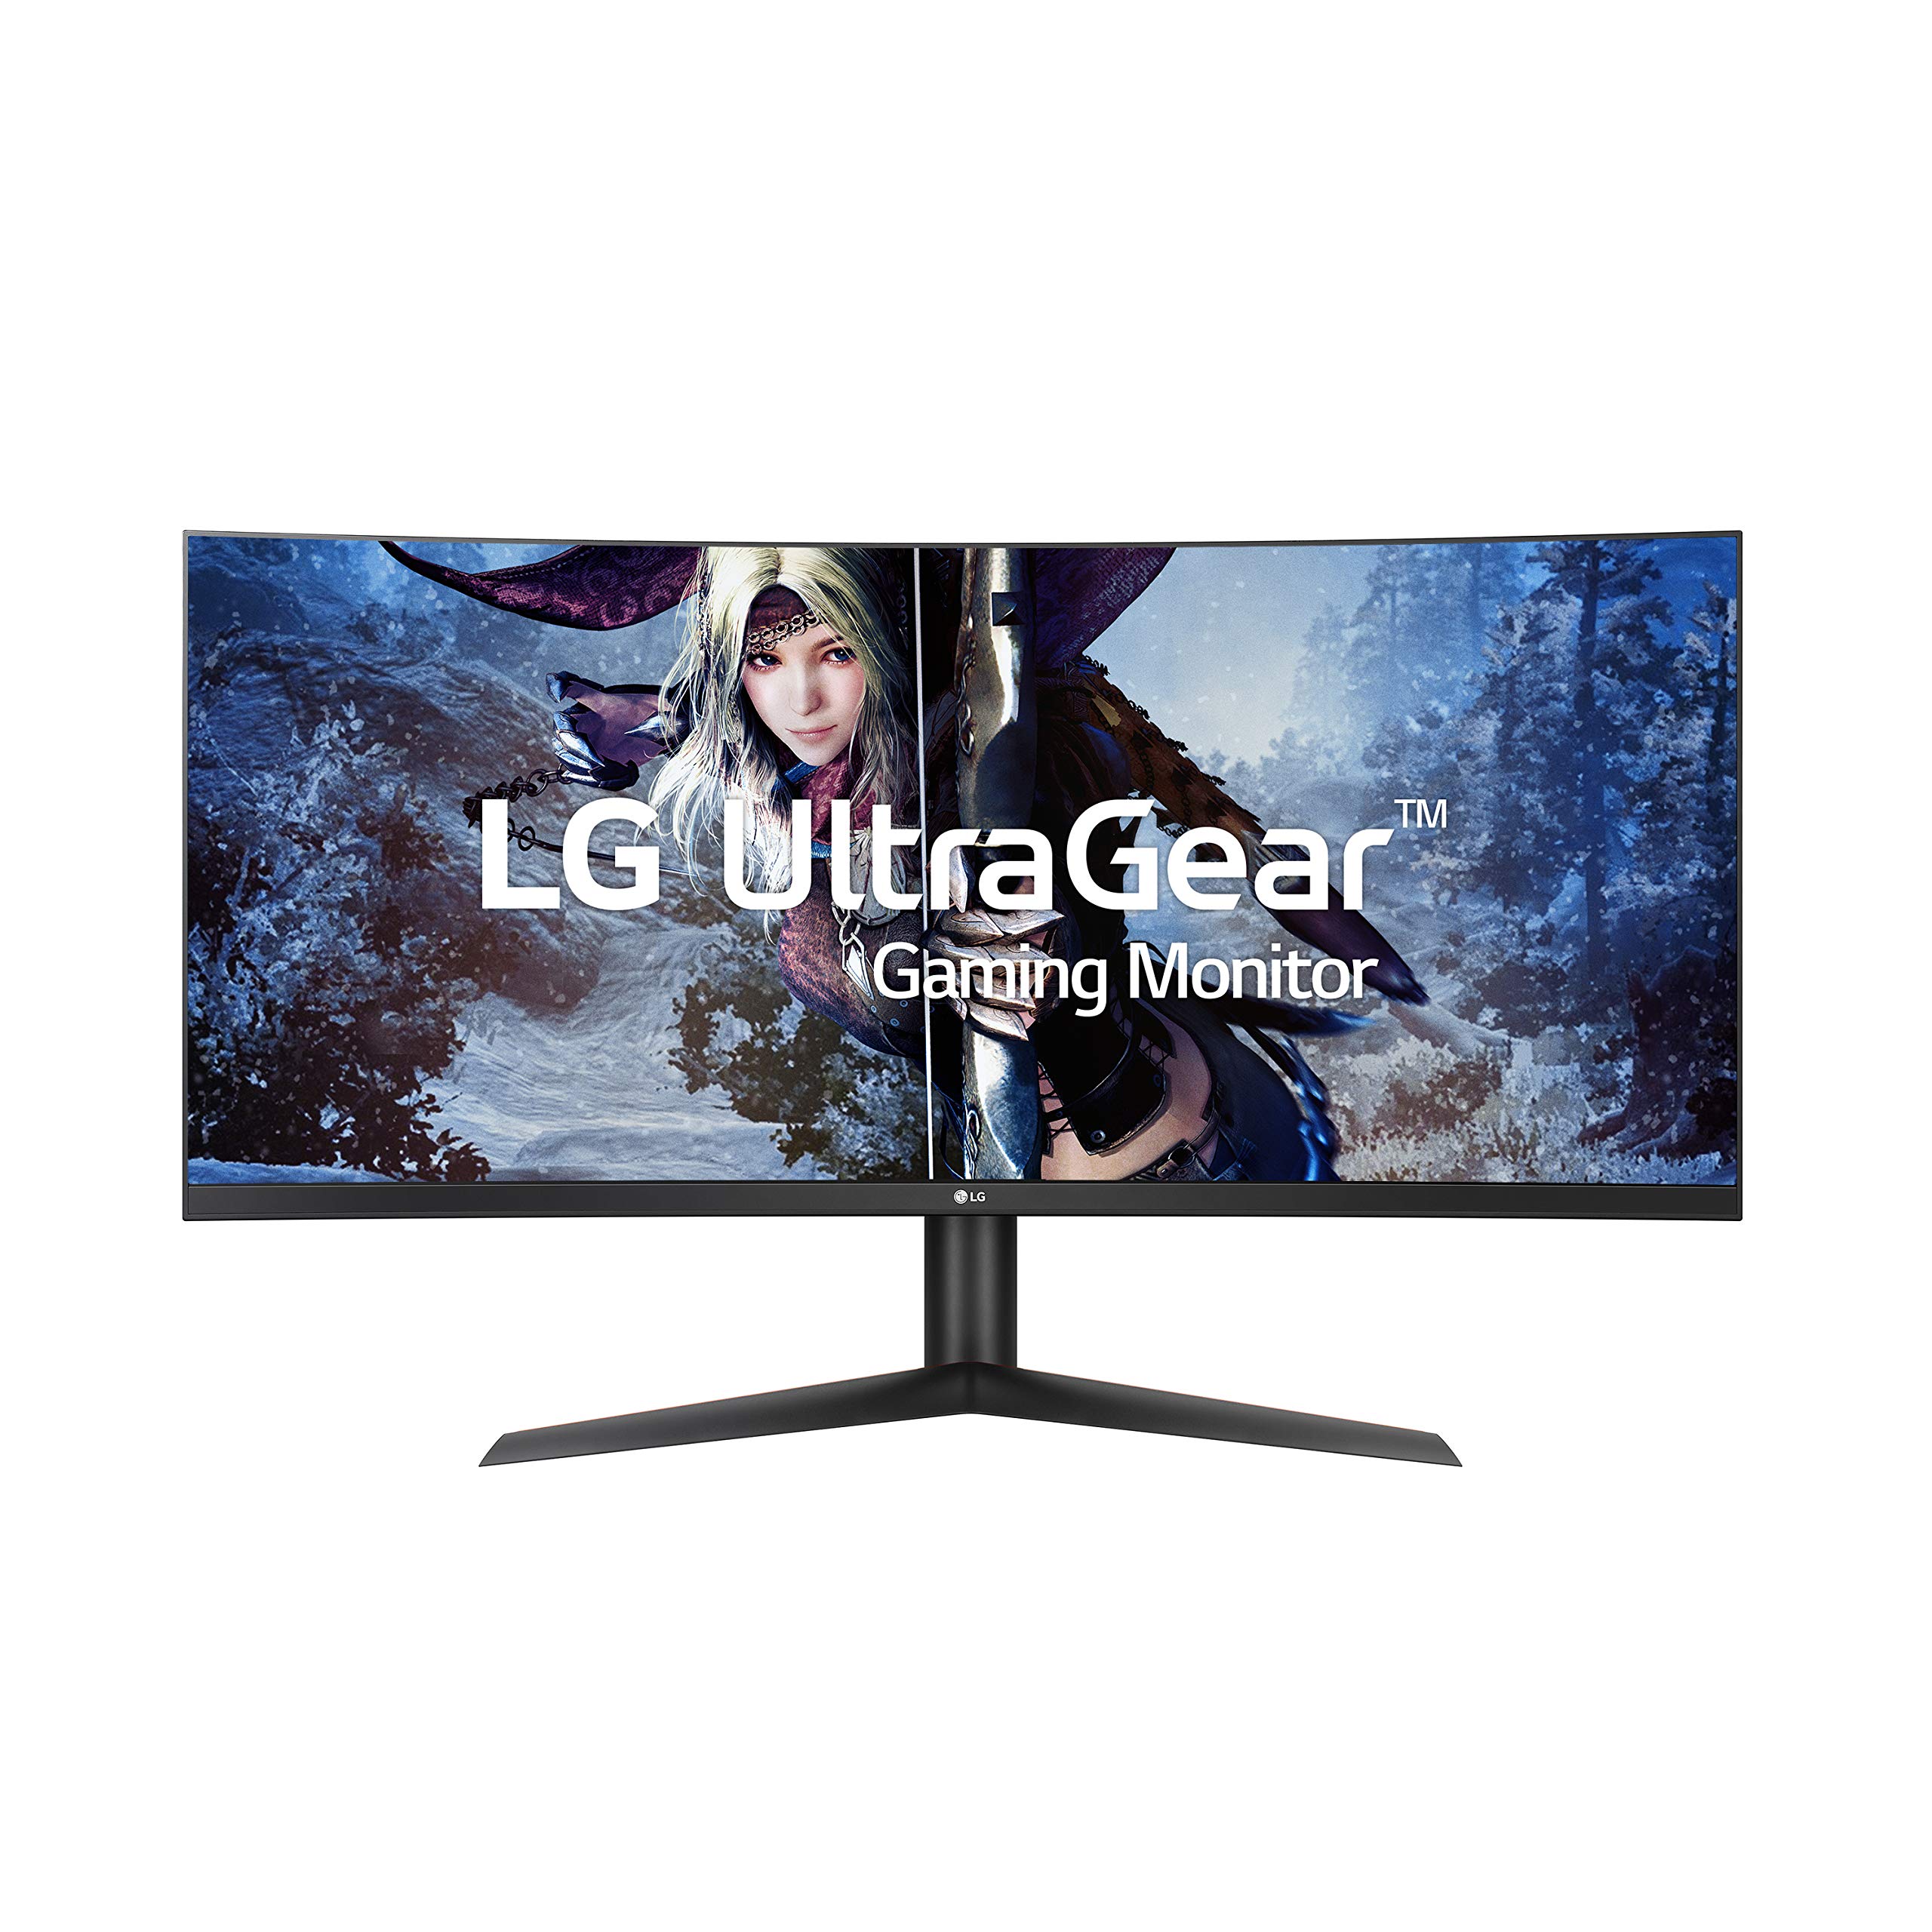 LG 38GL950G-B 38 Inch QHD Ultra Wide 1440p UltraGear Nano IPS 1ms Curved Gaming Monitor with 144HZ Refresh Rate and NVIDIA G-SYNC, Black